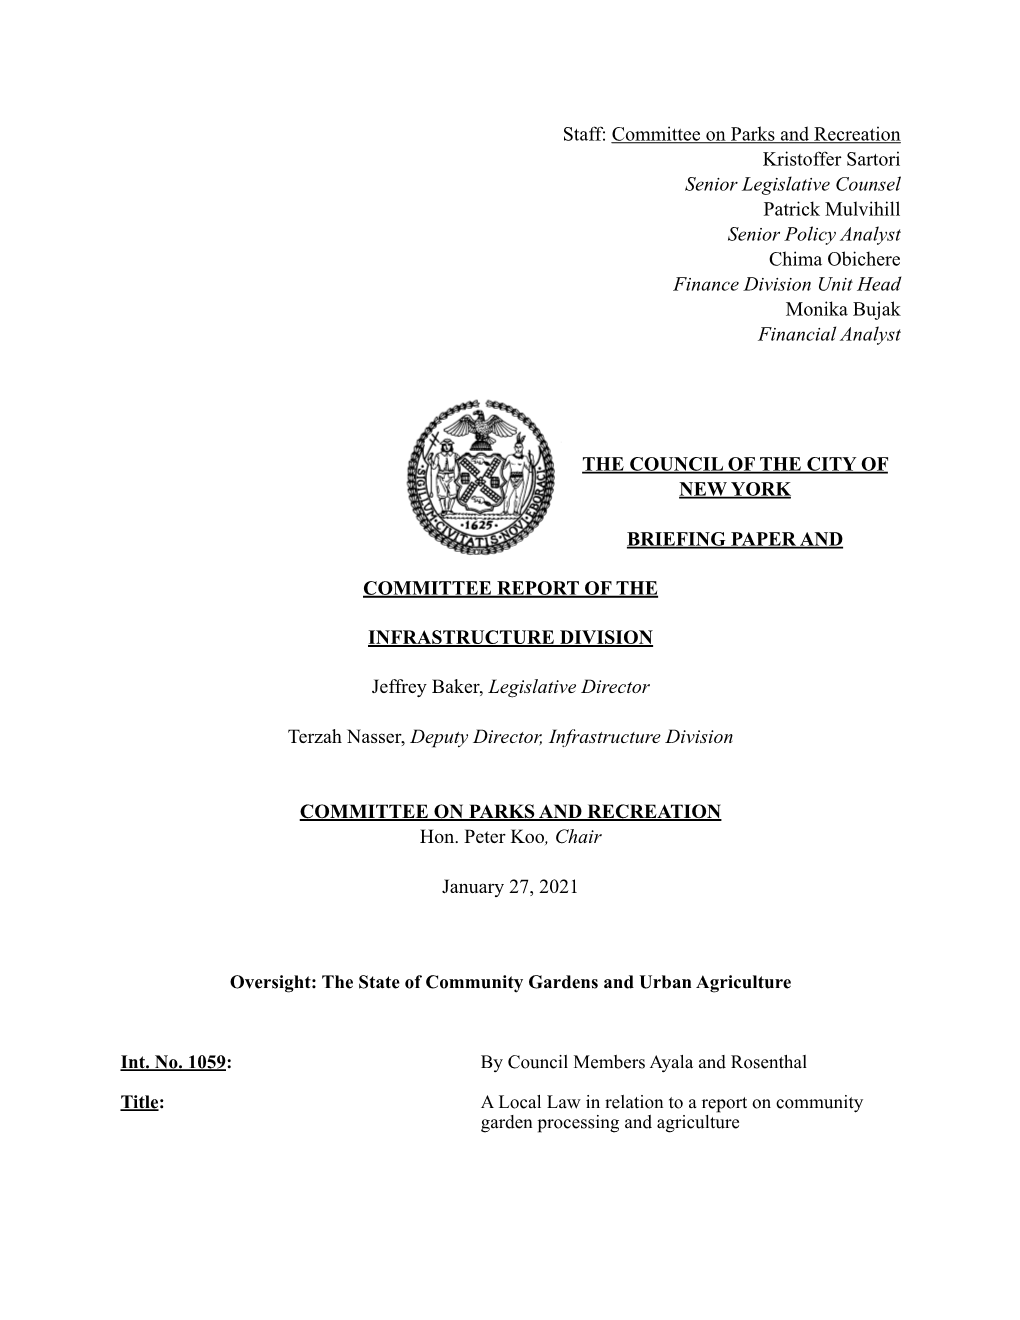 NYC Council Parks Committee Report 1.27.21